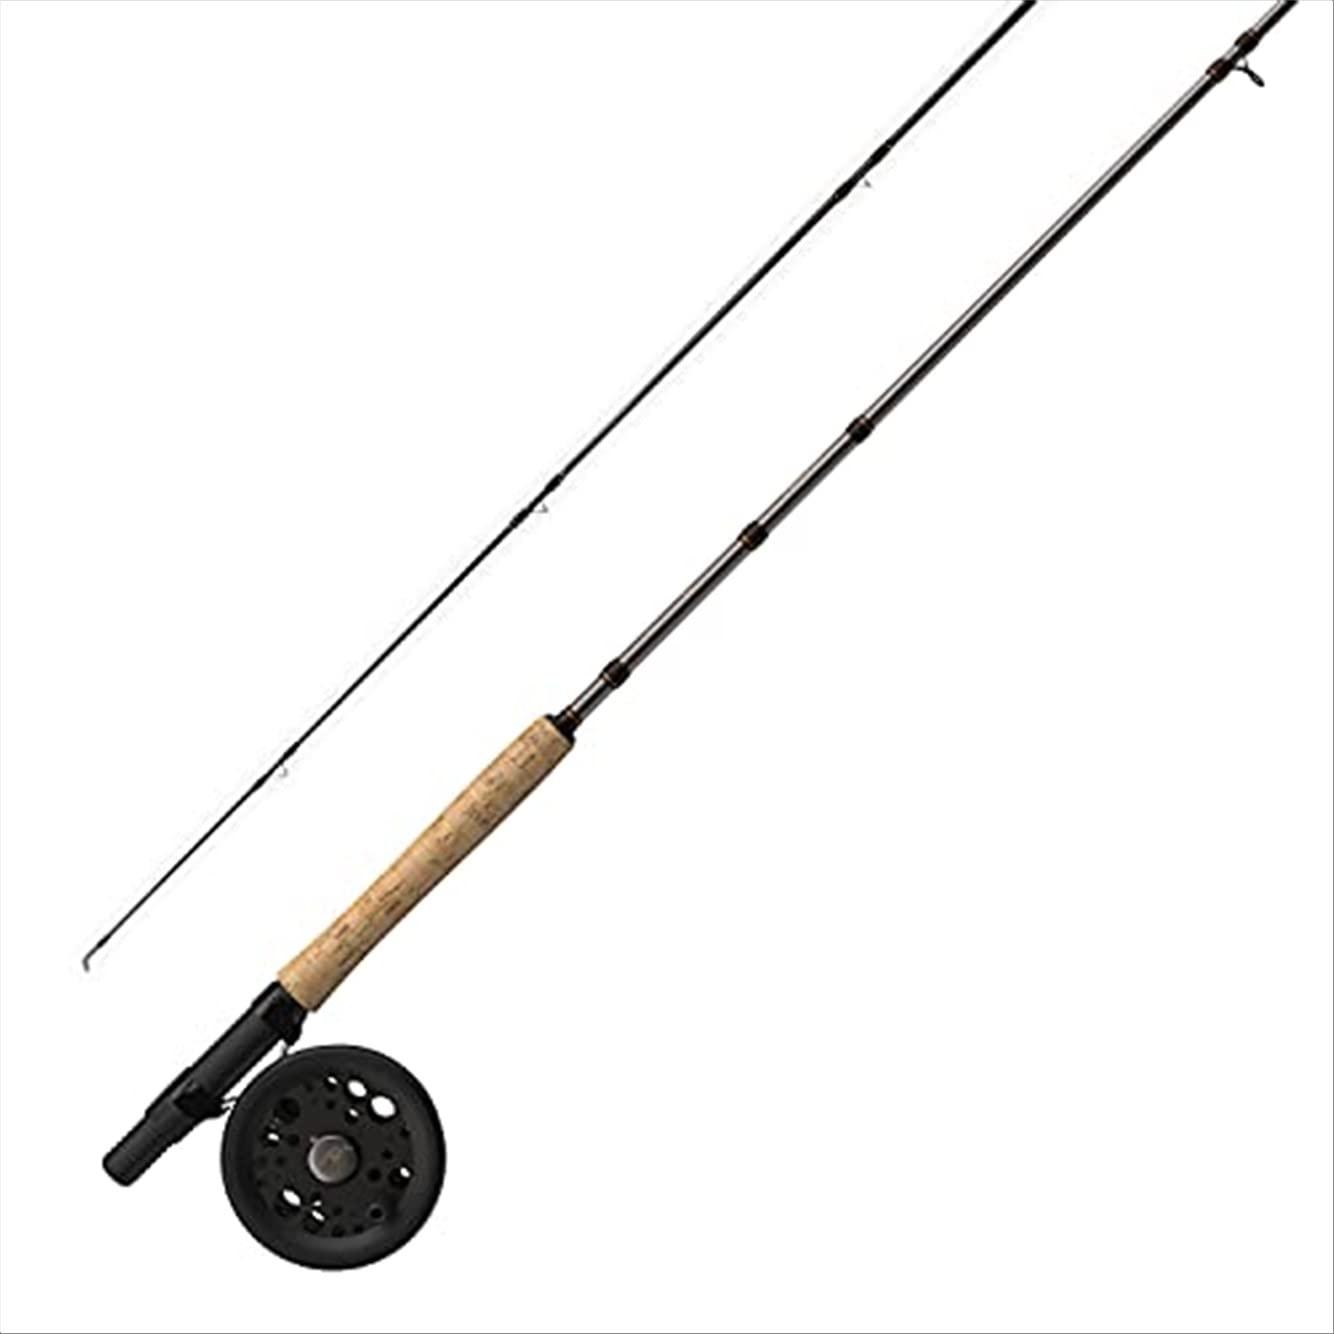 Martin Caddis Creek Fly Fishing Reel and Rod Combo, 9-Foot 7/8-Weight  2-Piece Fly Fishing Pole, Size 6/8 Rim-Control Single Action Reel, Natural  Cork Rod Handle, Durable Aluminum Frame, Brown